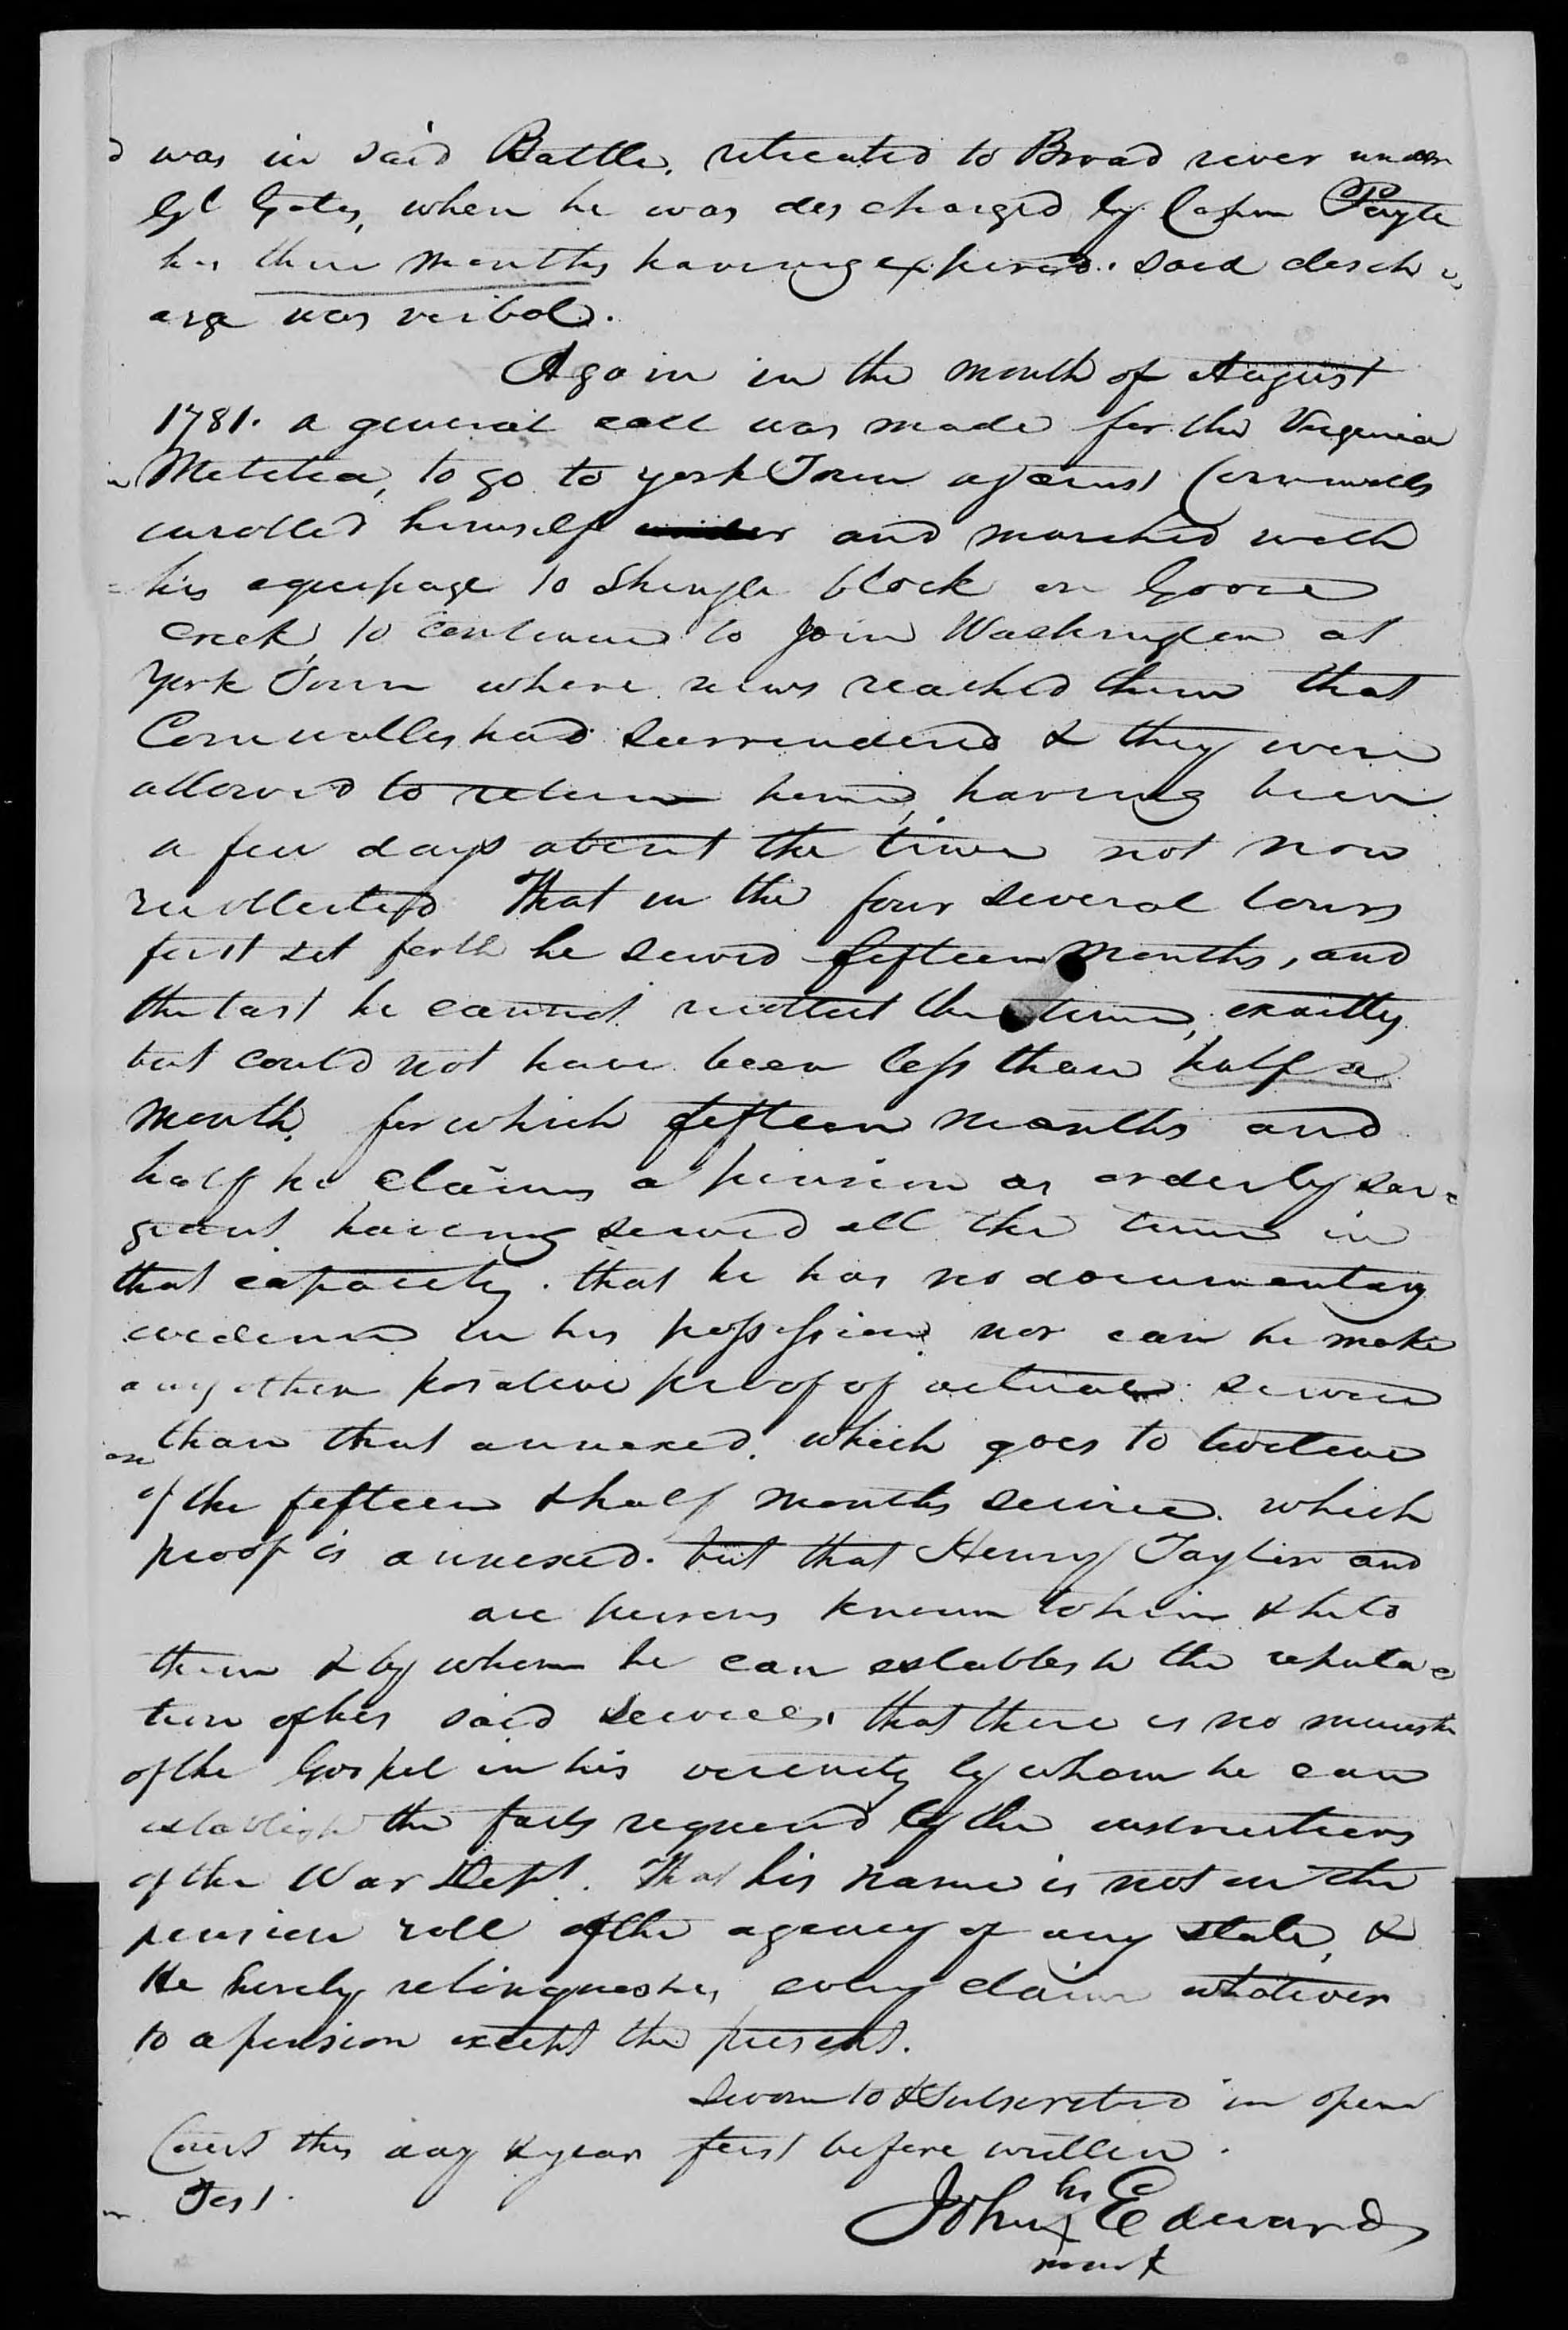 Application for a Veteran's Pension from John Edwards, 9 September 1833, page 3